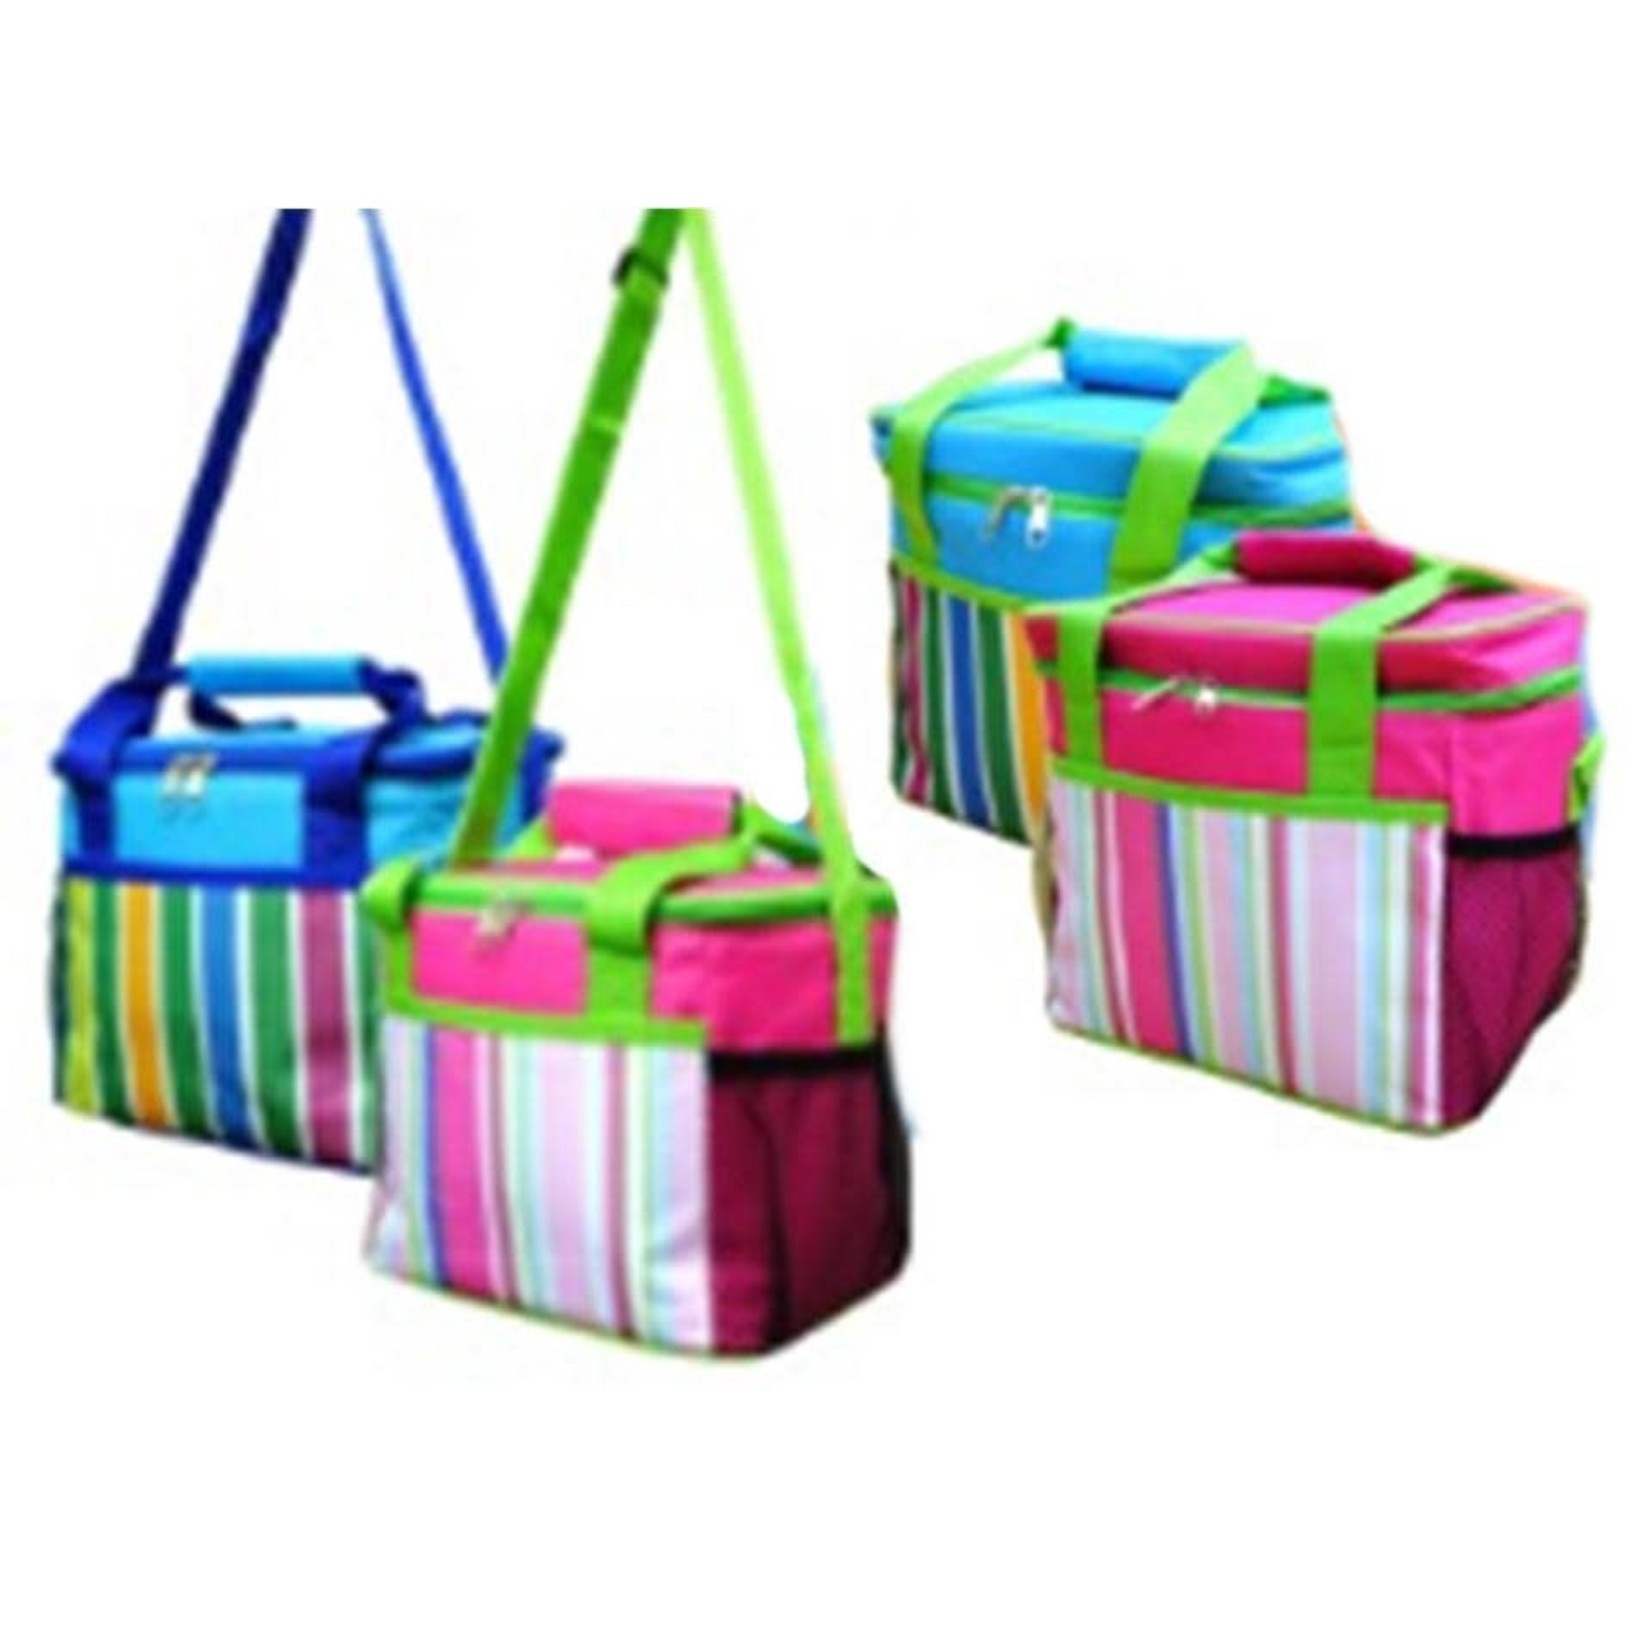 STRIPED INSULATED PICNIC COOLER BAG